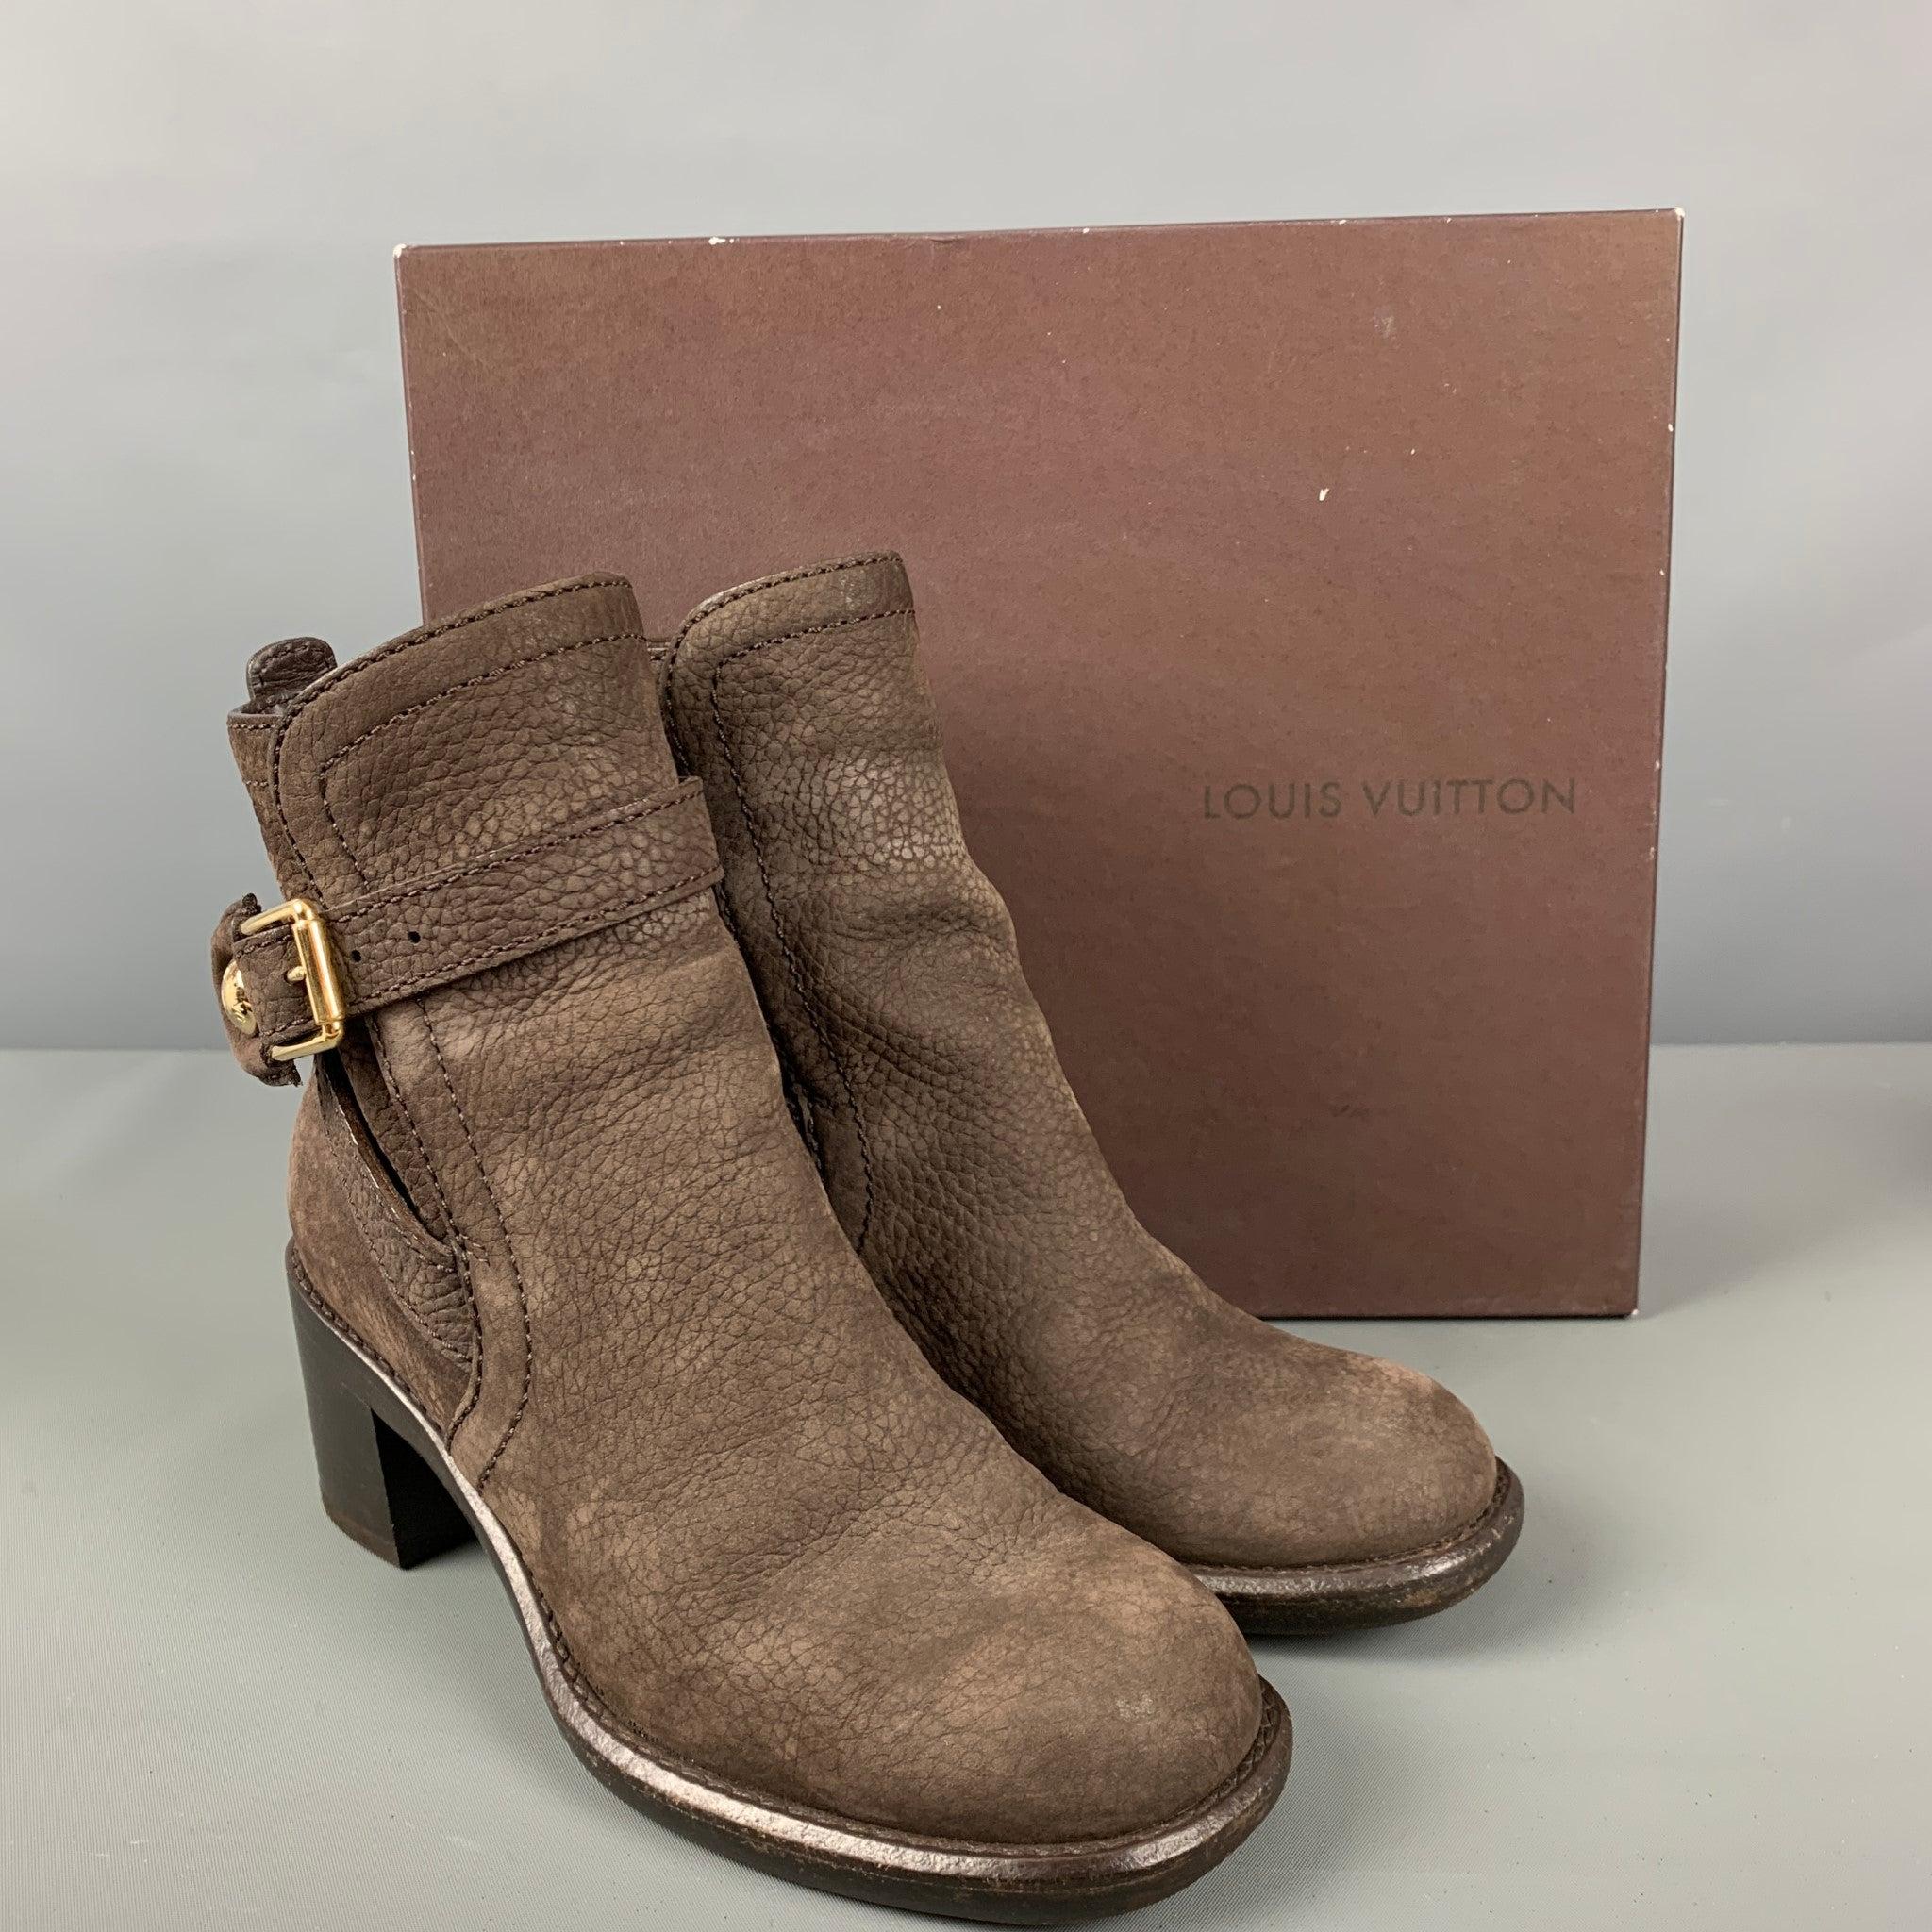 LOUIS VUITTON Size 5.5 Brown Leather Pebble Grain Chunky Heel Boots For Sale 4